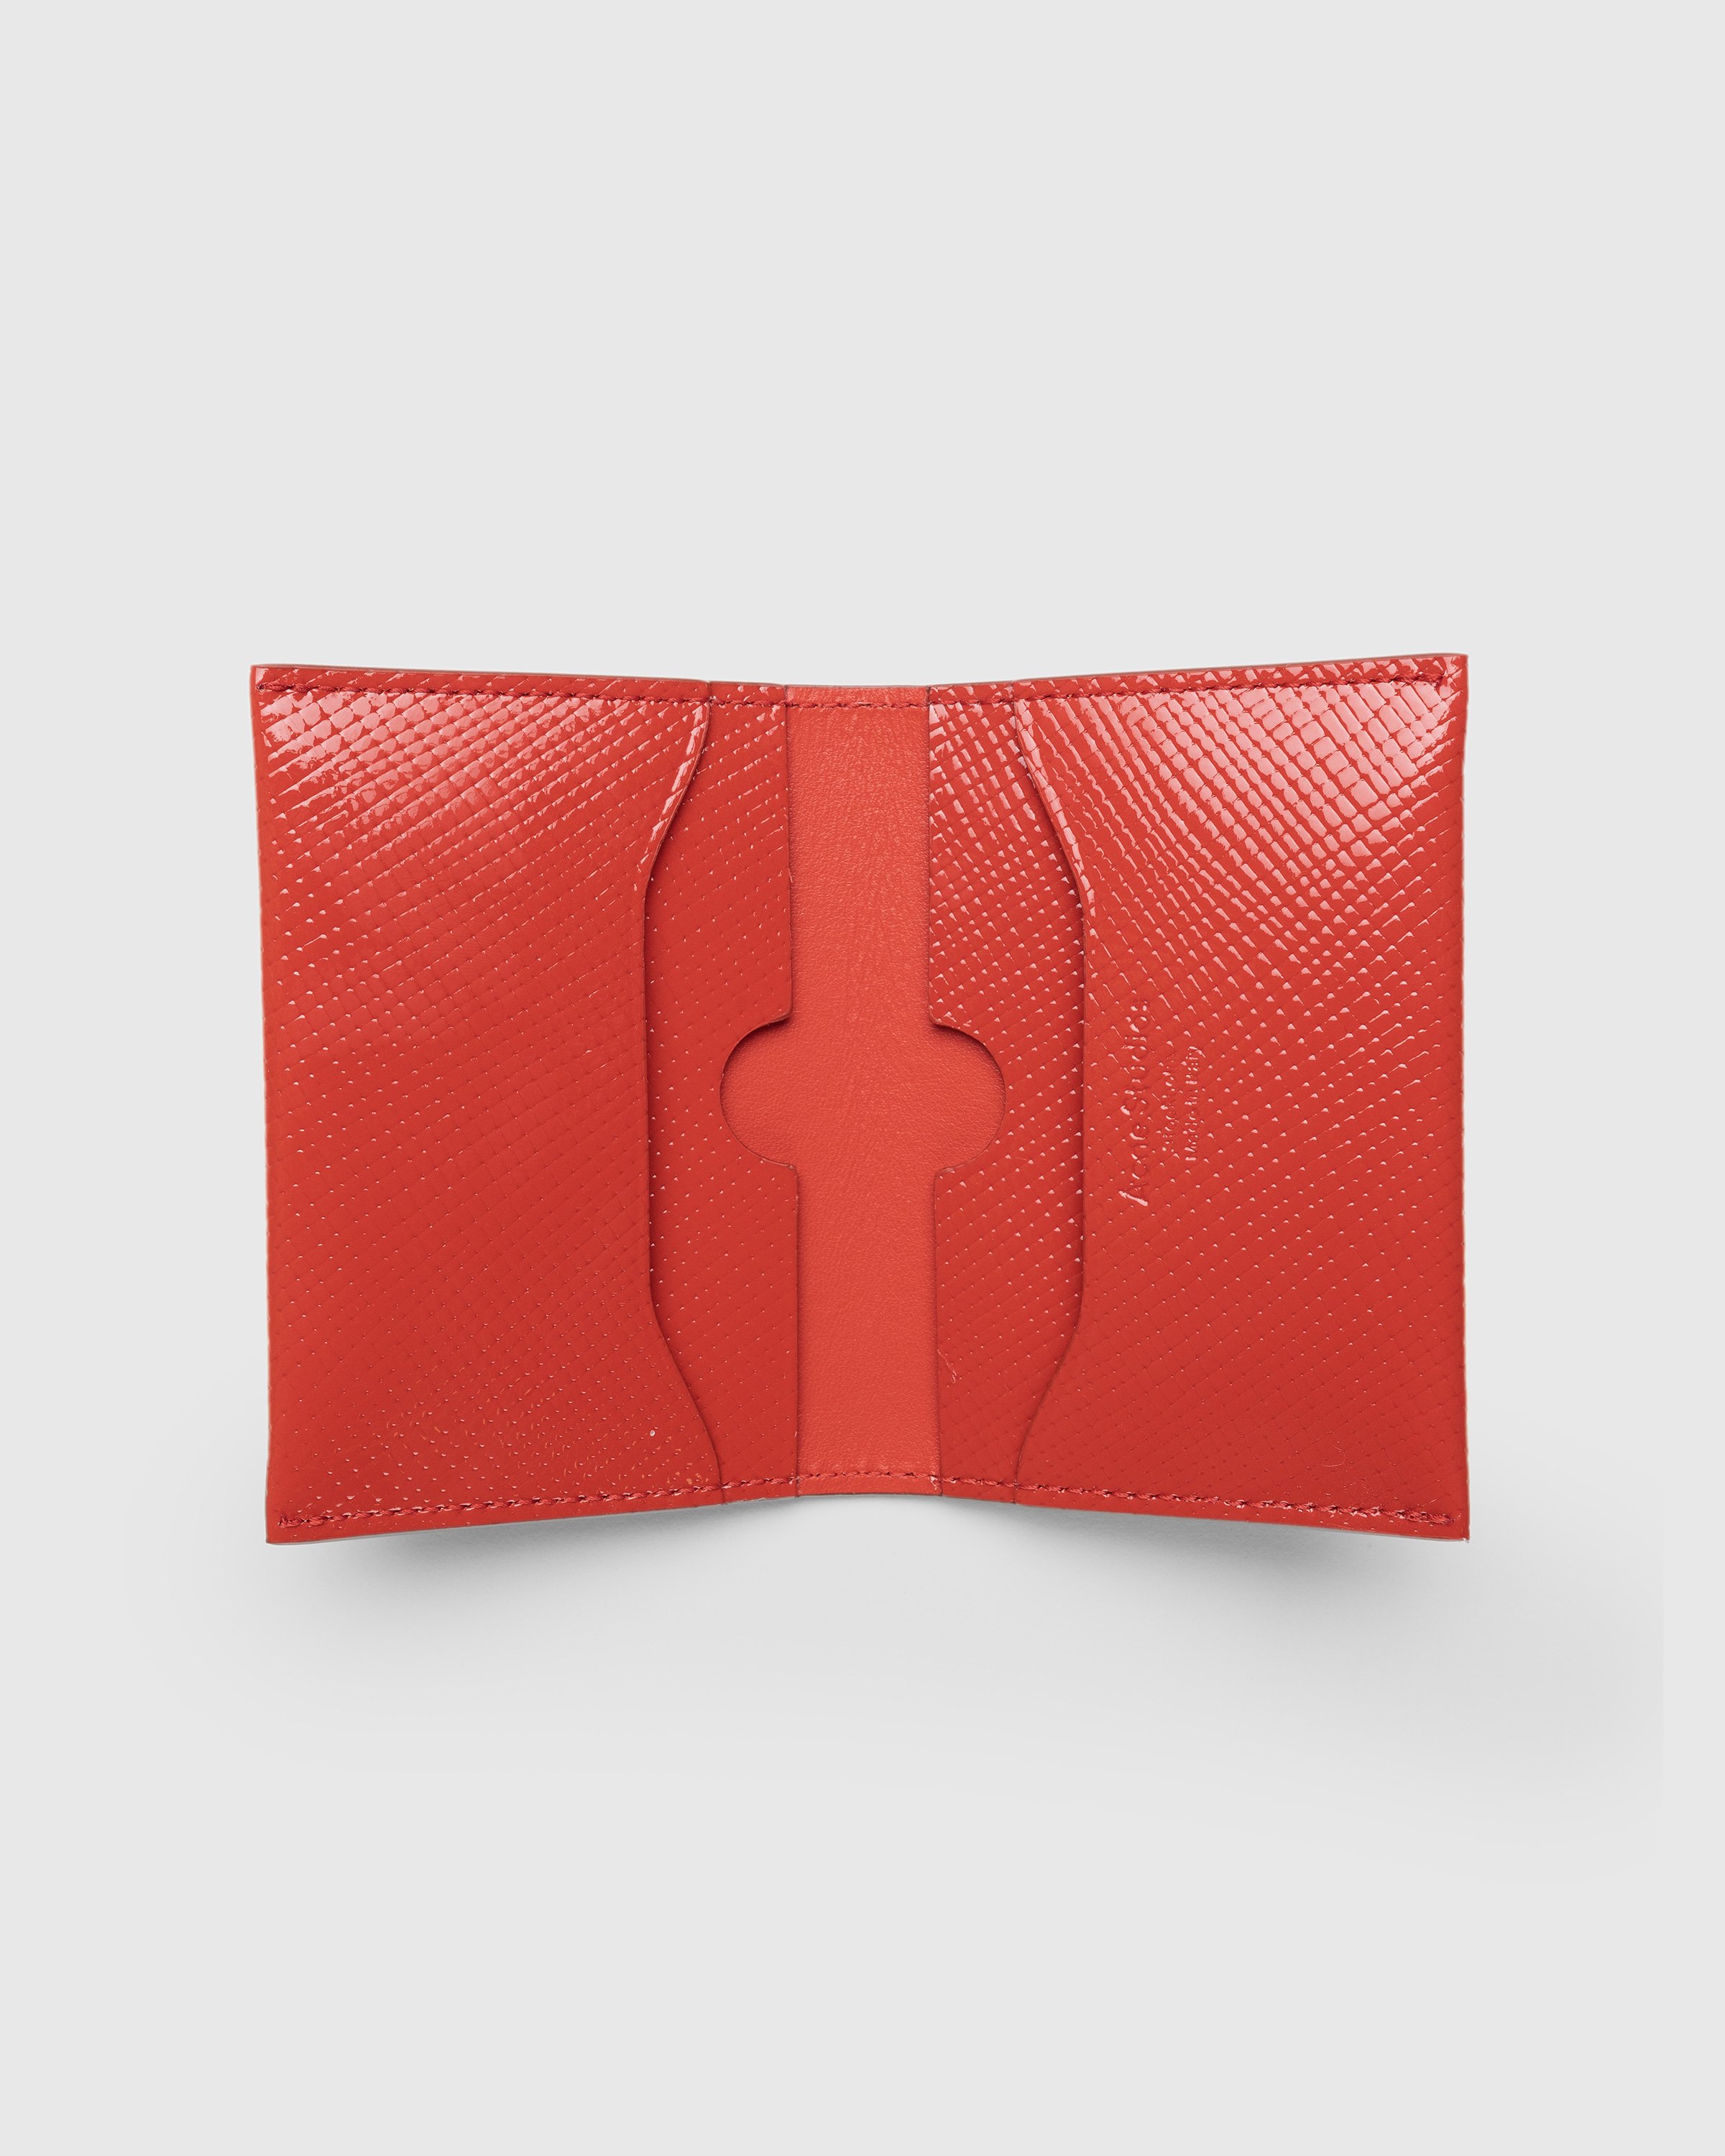 Acne Studios - Folded Card Holder Red - Accessories - Red - Image 3